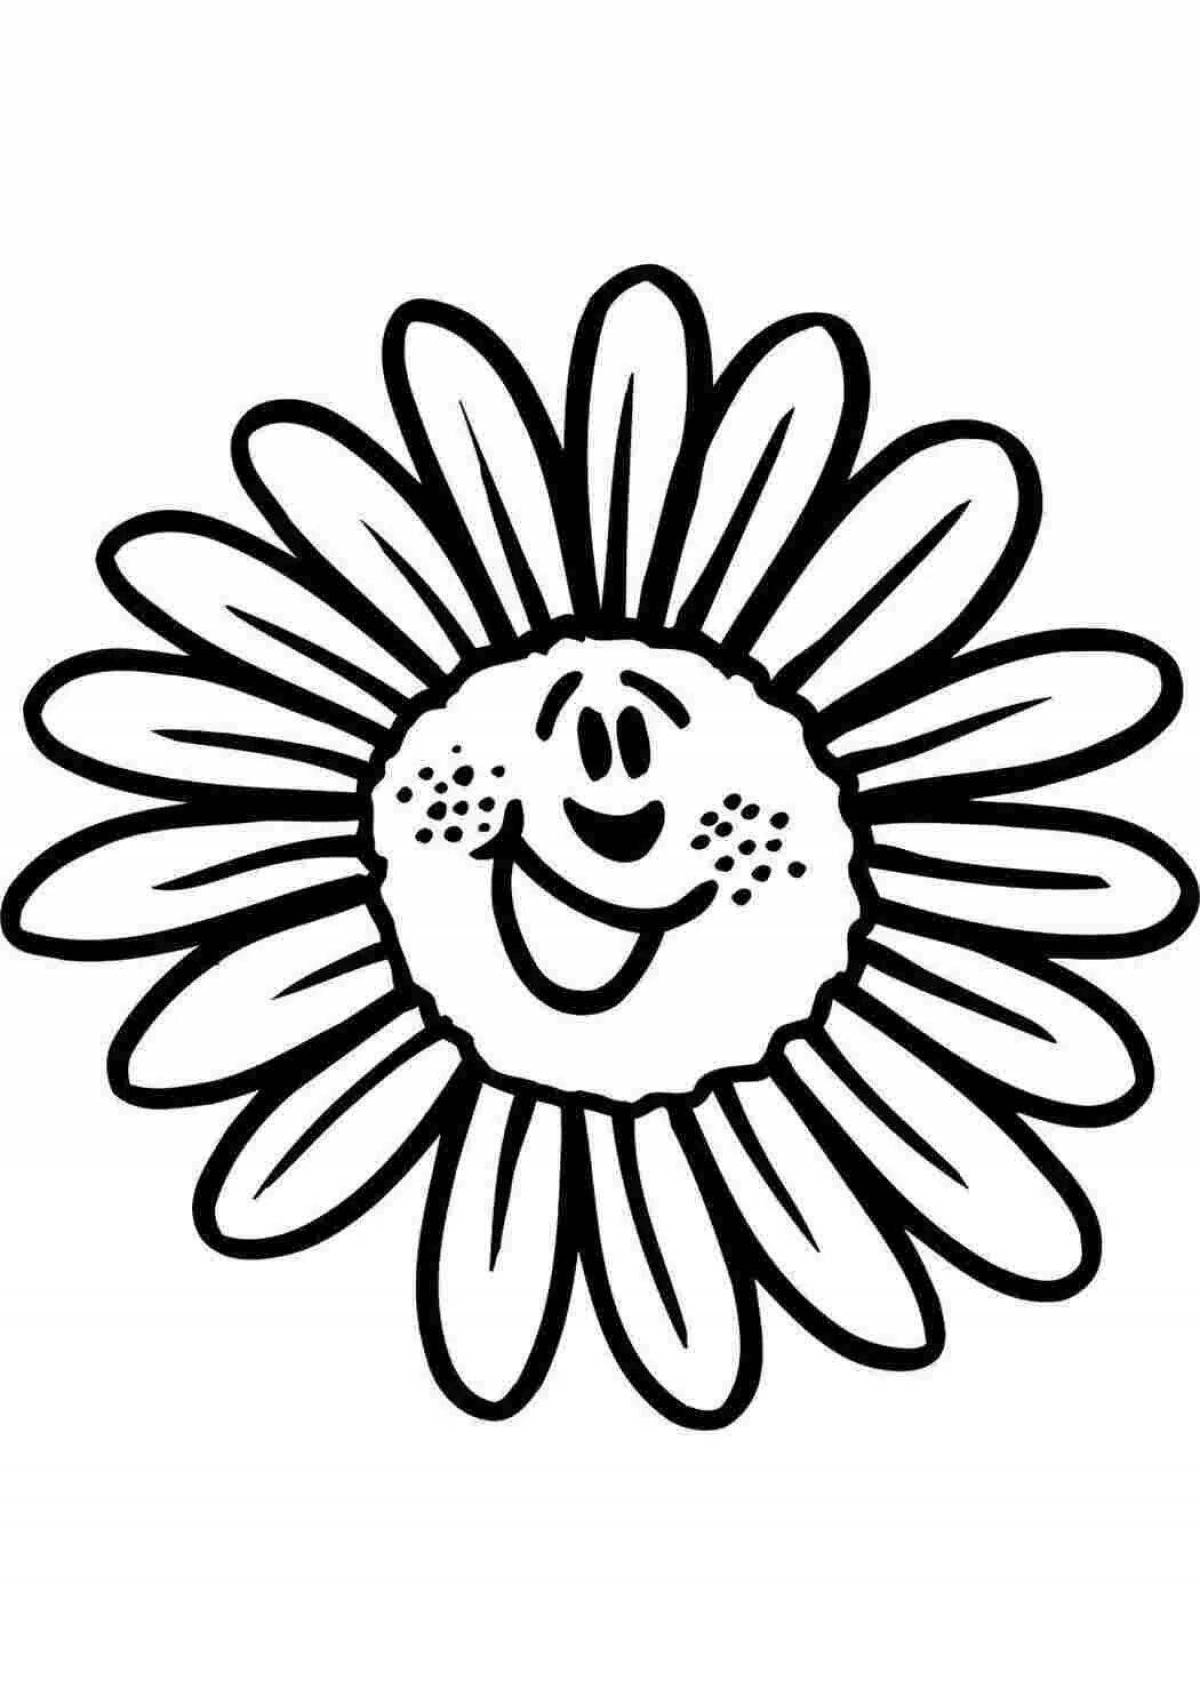 Joyful Daisy Flower Coloring for Toddlers